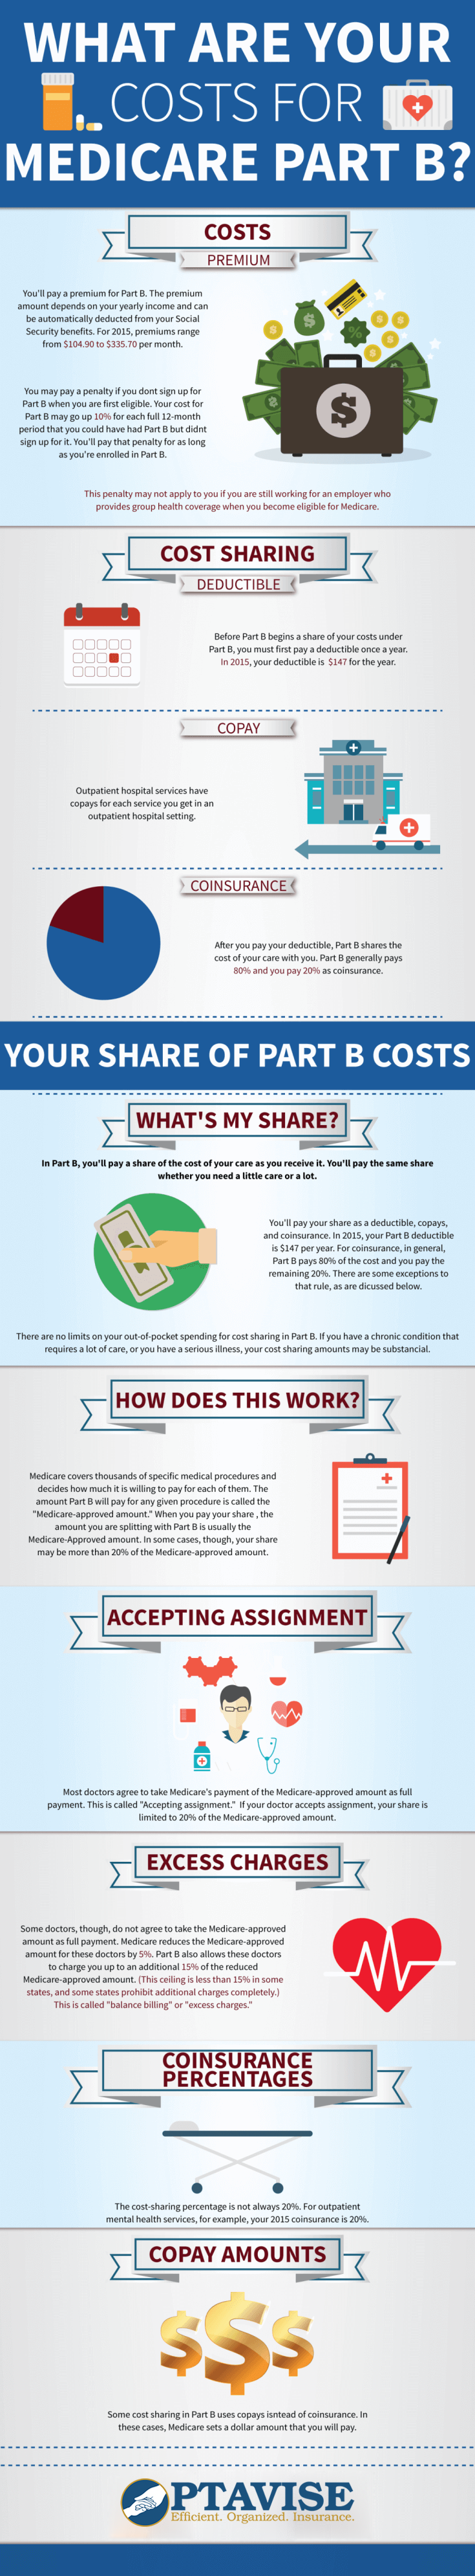 What Are the Costs of Medicare Part B